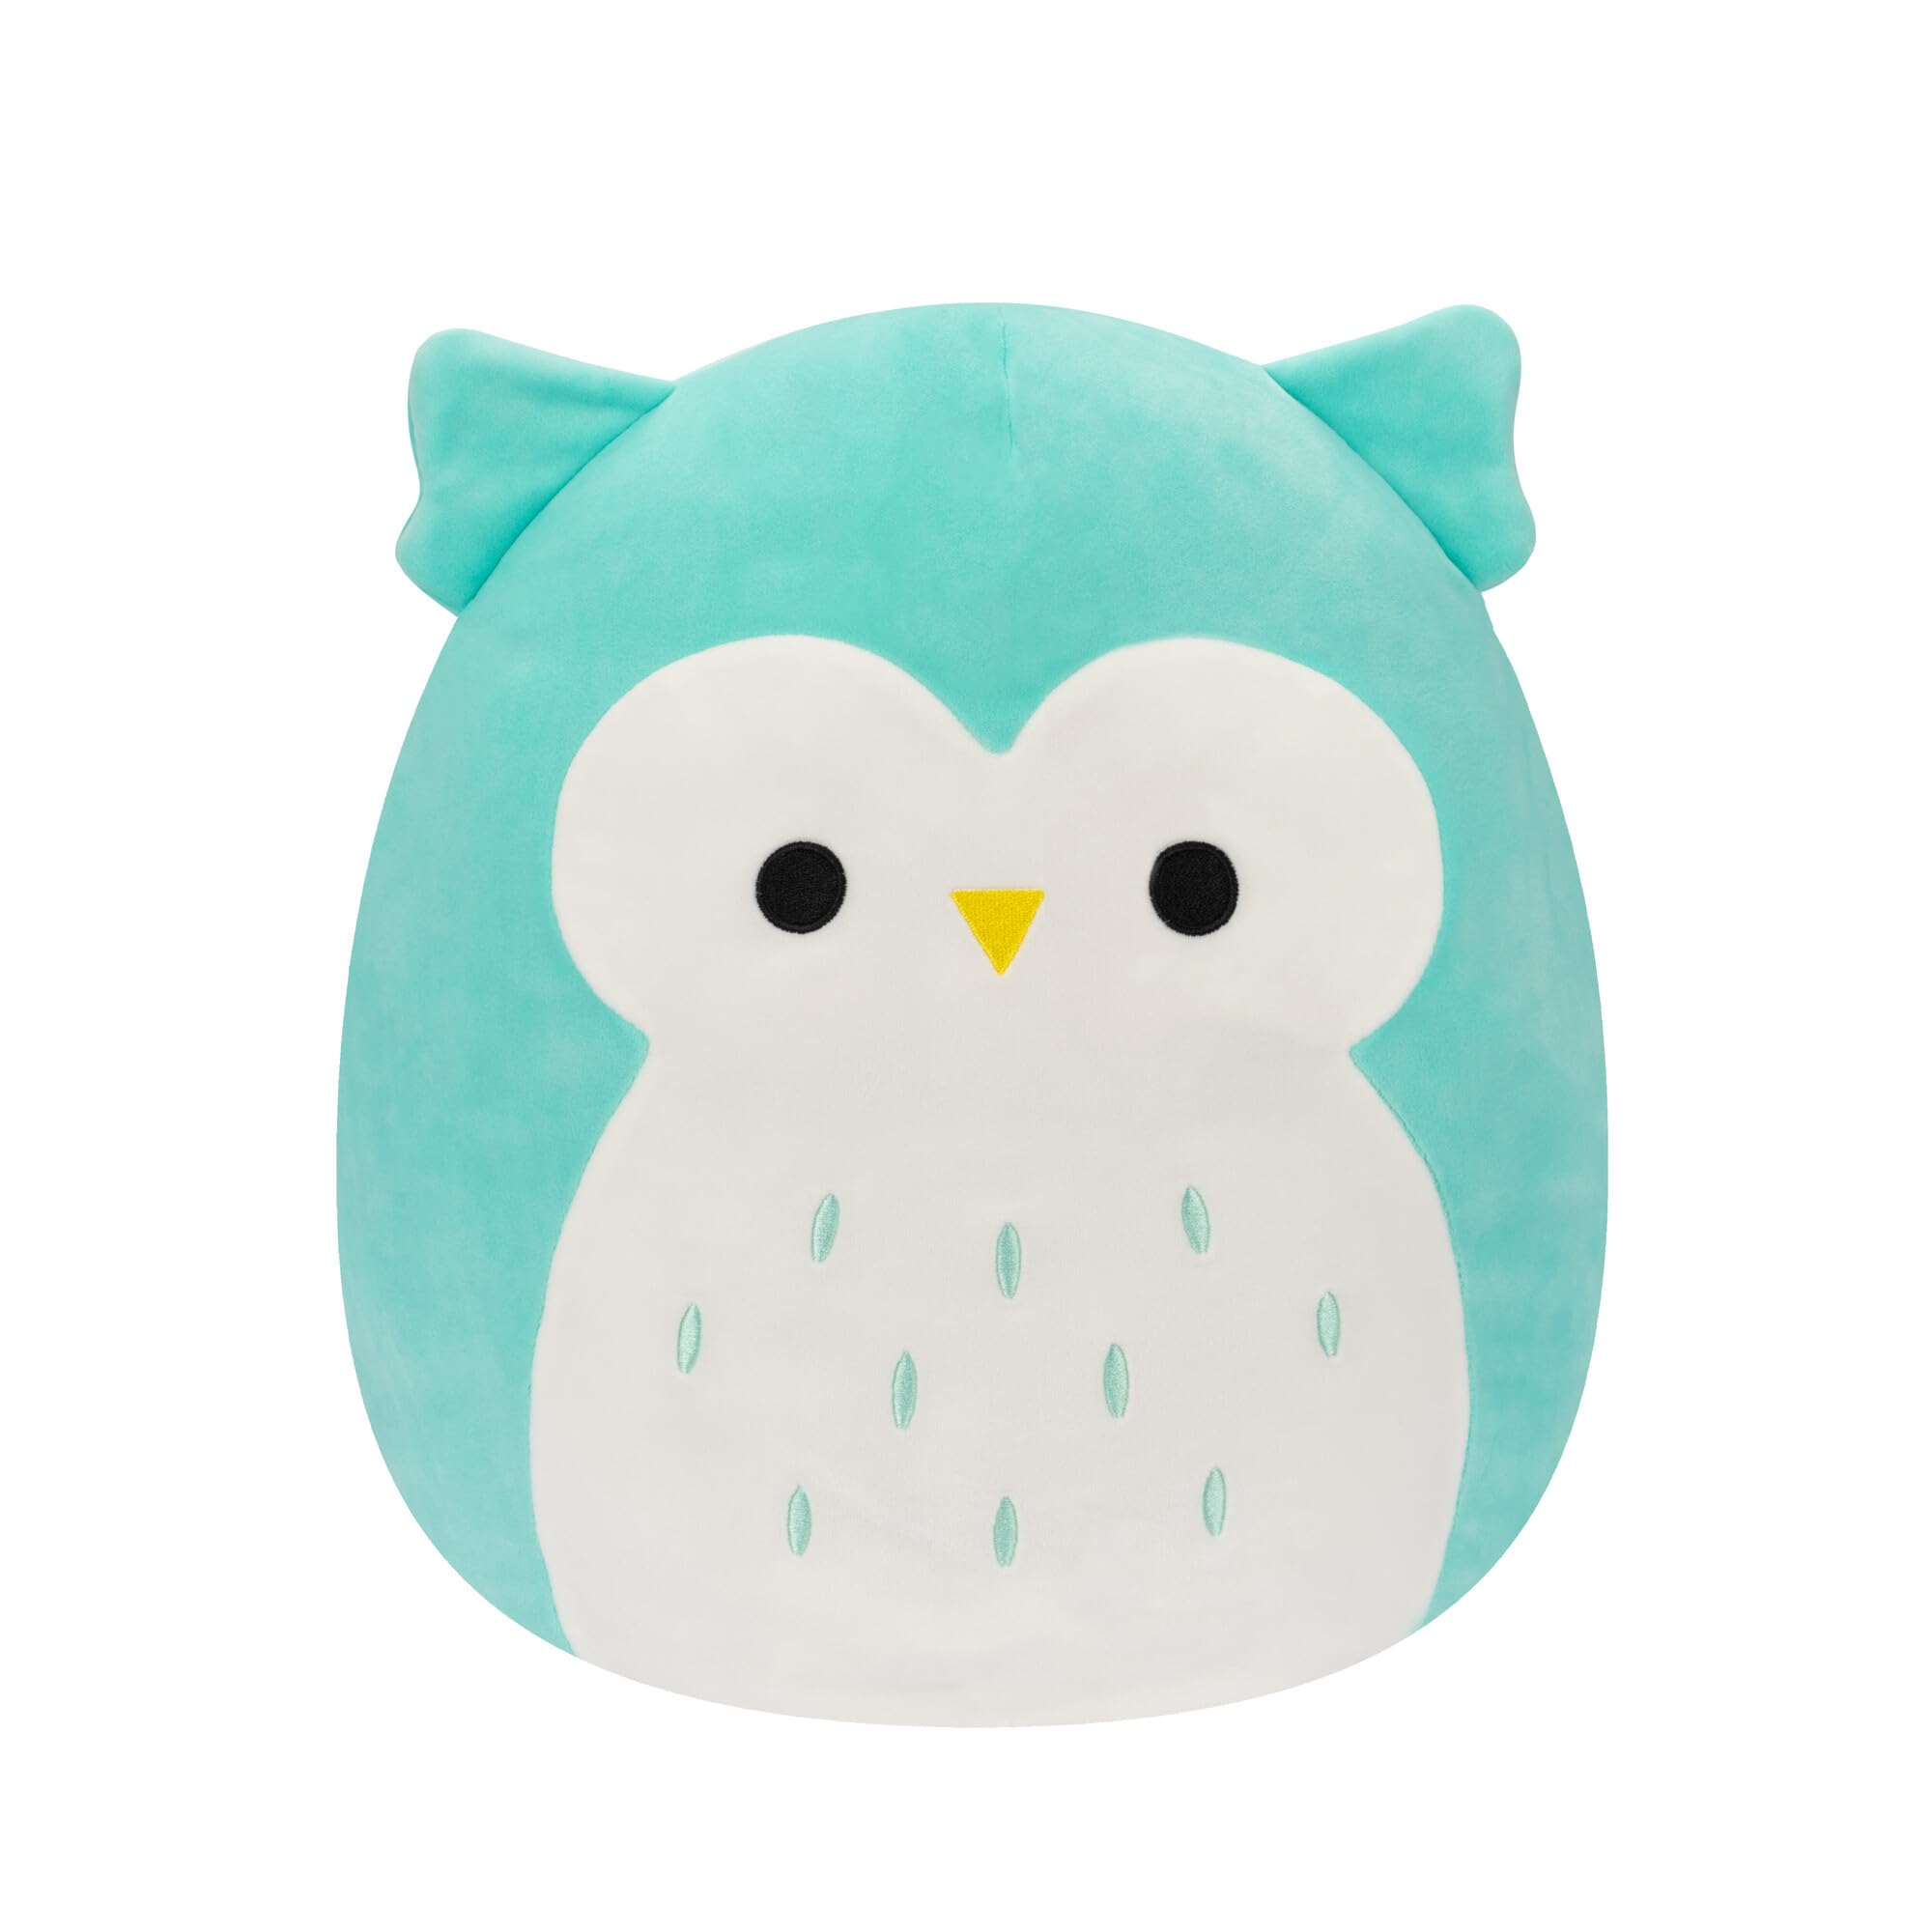 Squishmallows Original 14-Inch Winston Teal Owl - Large Ultrasoft Official Jazwares Plush